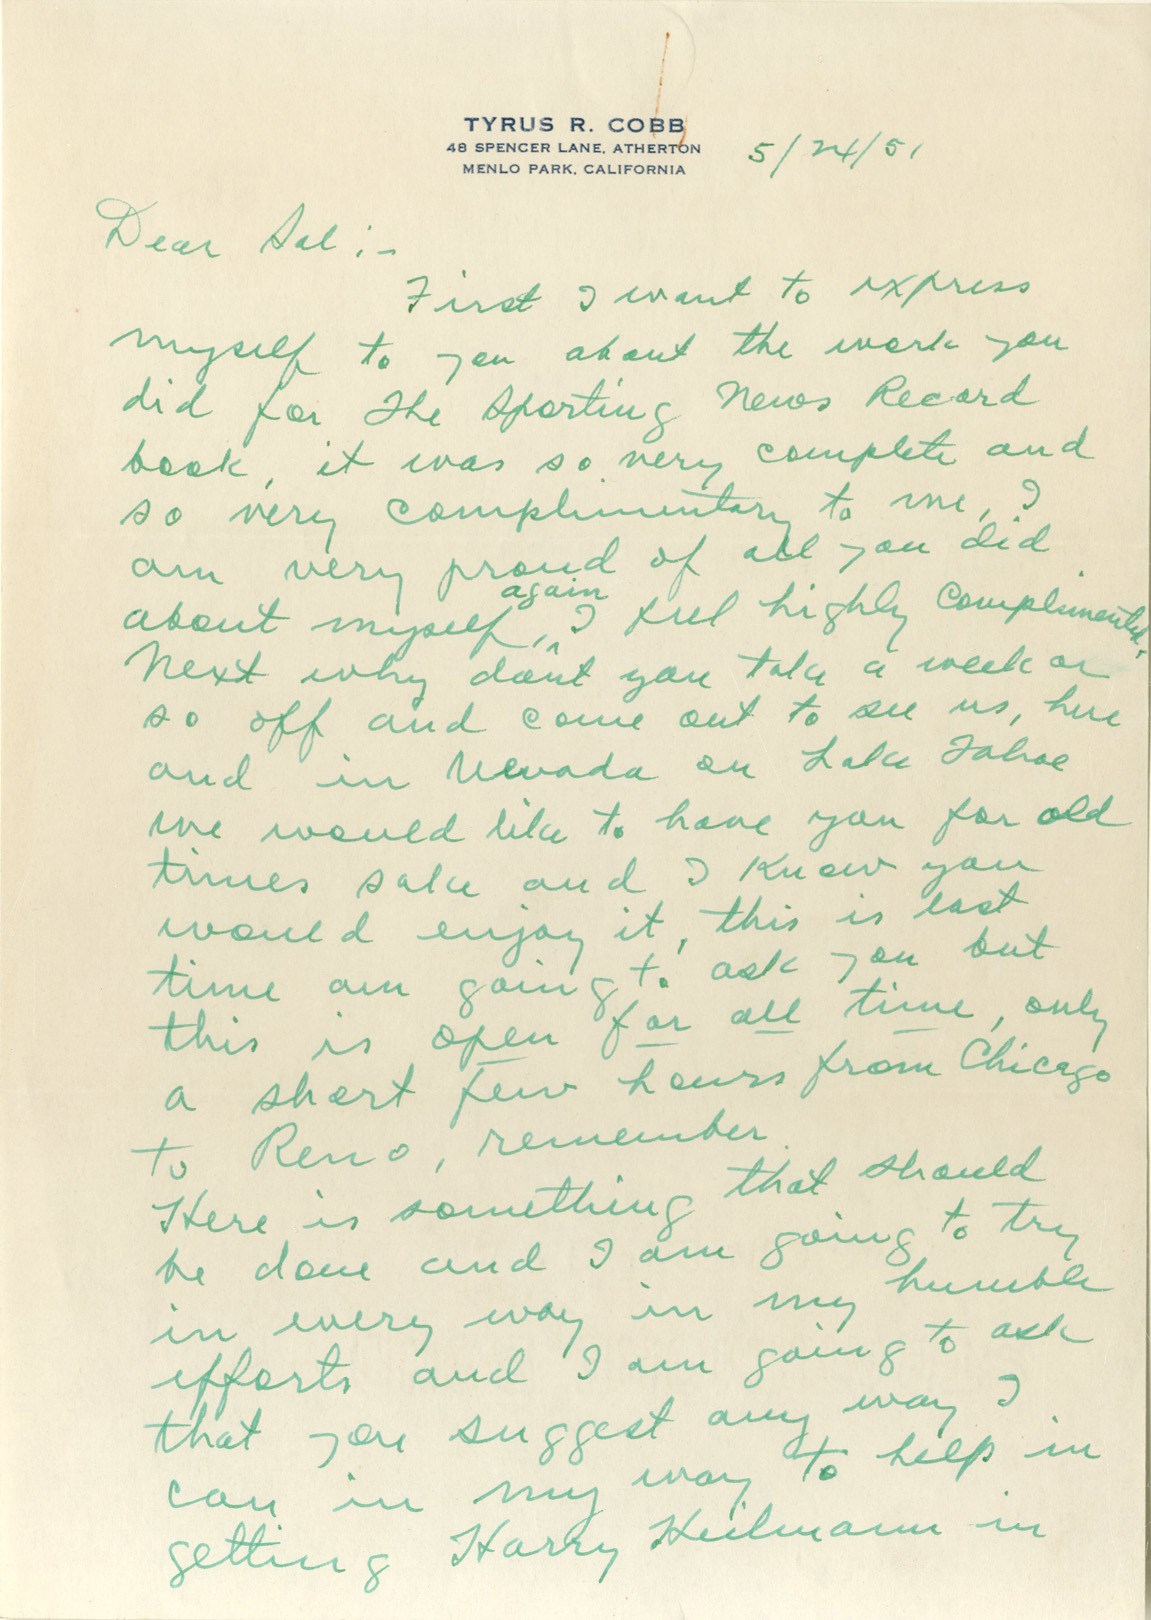 Ty Cobb and Detroit Tigers - 1951 Ty Cobb Handwritten Letter Lobbying for Harry Heilmann's Hall of Fame Induction (by Legendary Sportswriter H.G. Salsinger)